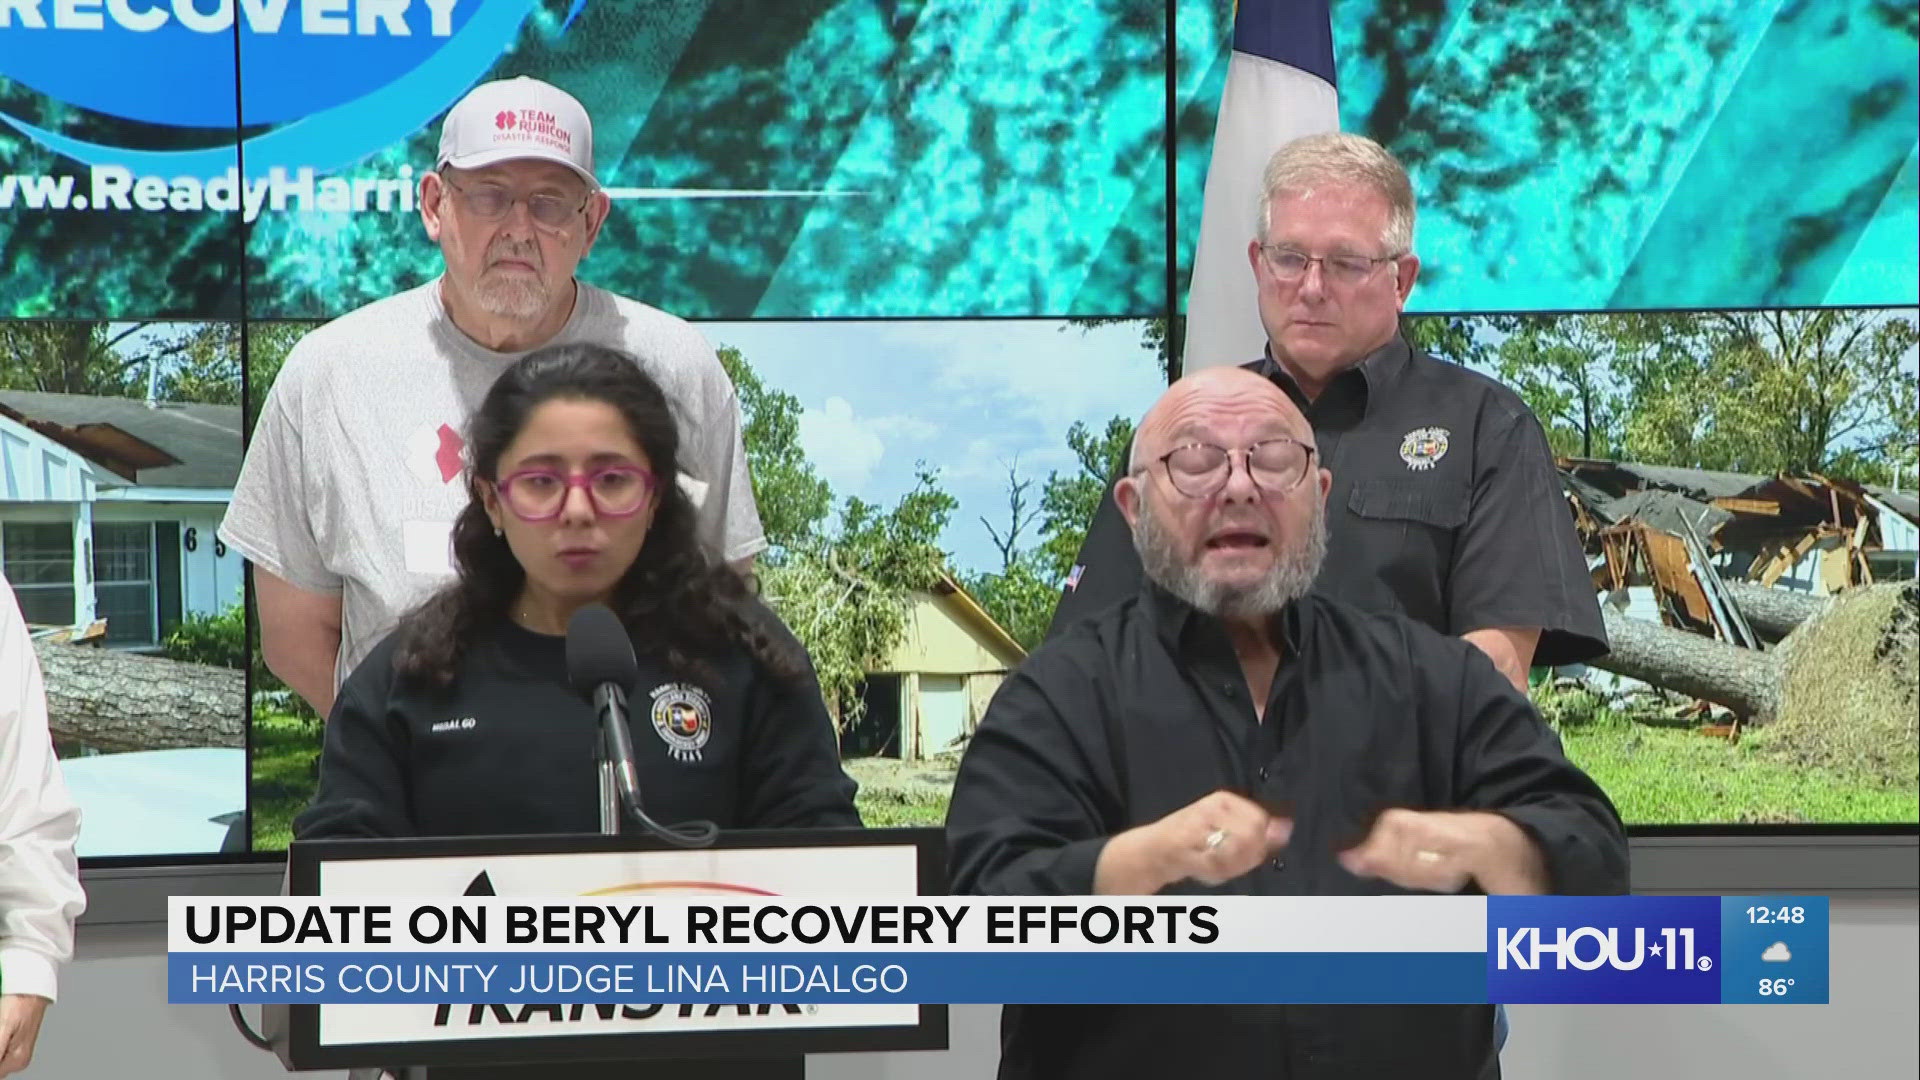 Harris County Judge Lina Hidalgo and other local officials gave an update on the county's response to Hurricane Beryl Friday afternoon.